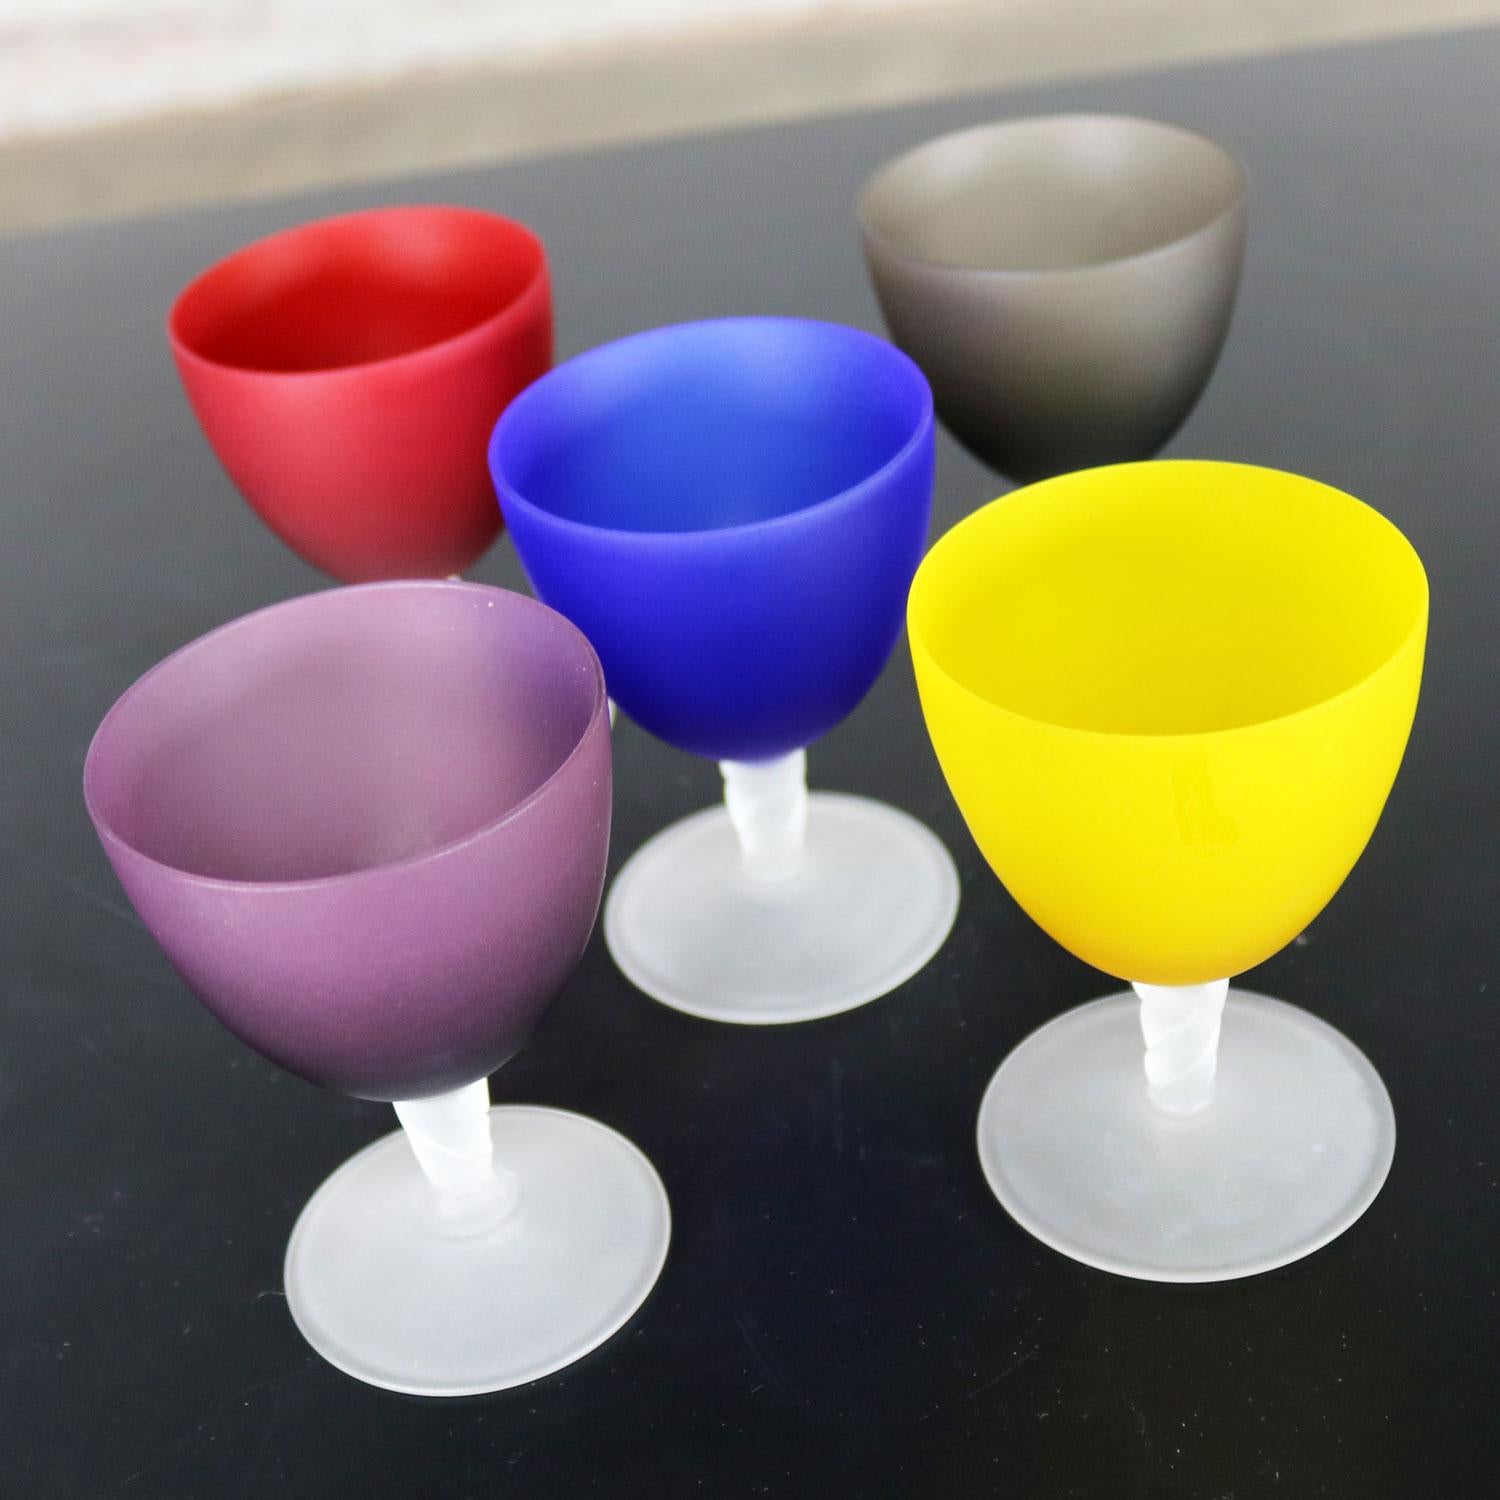 Set of 5 Small Multicolored Frosted Glass Wine Coupes or Cordial Glasses 3